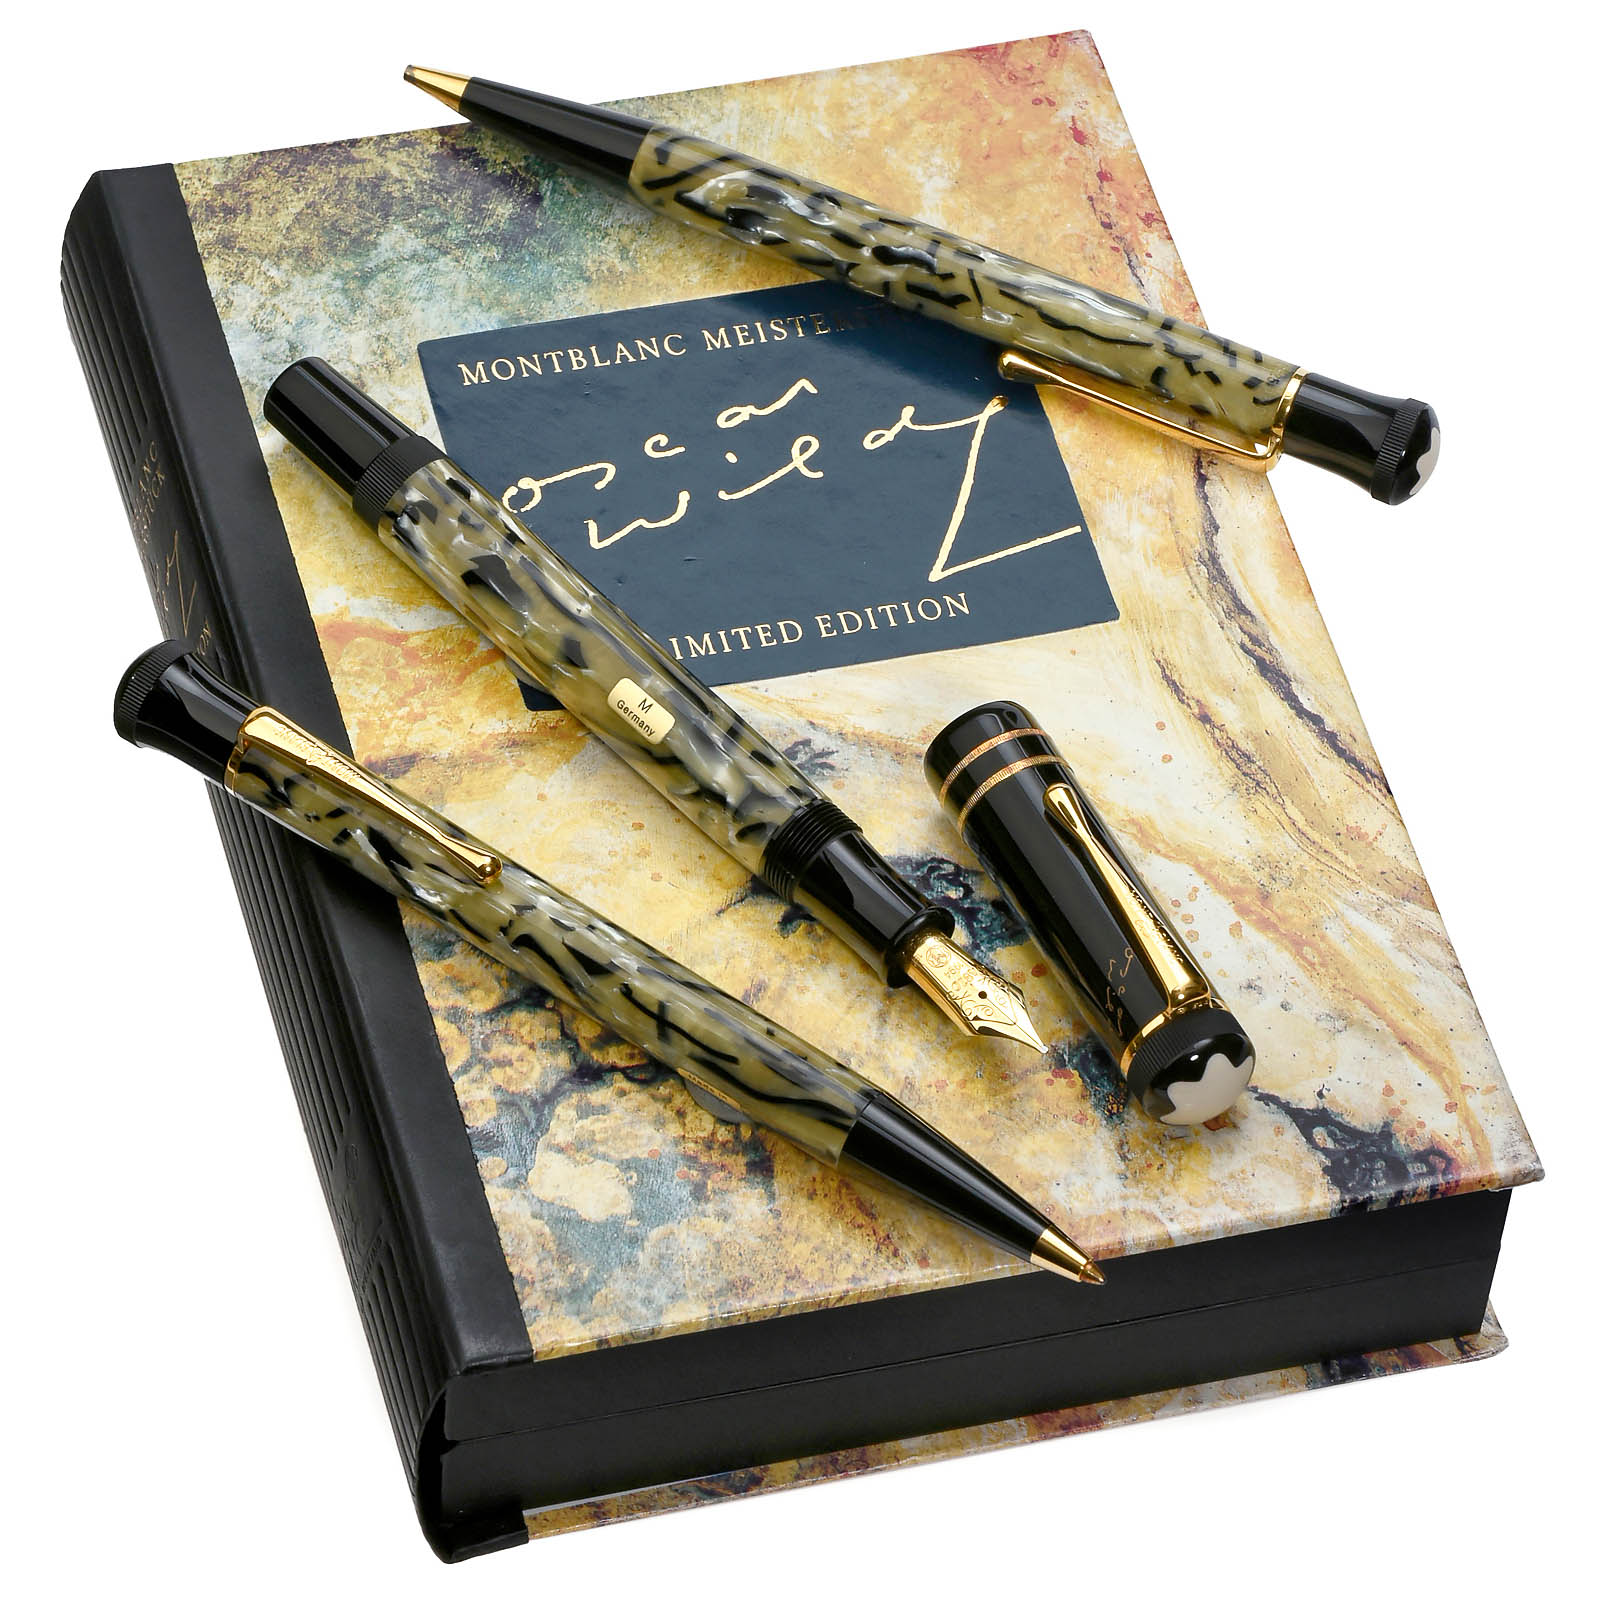 Montblanc "Oscar Wilde" Writing Set, 1994
Limited Writers Edition 3-piece set. Including fountain